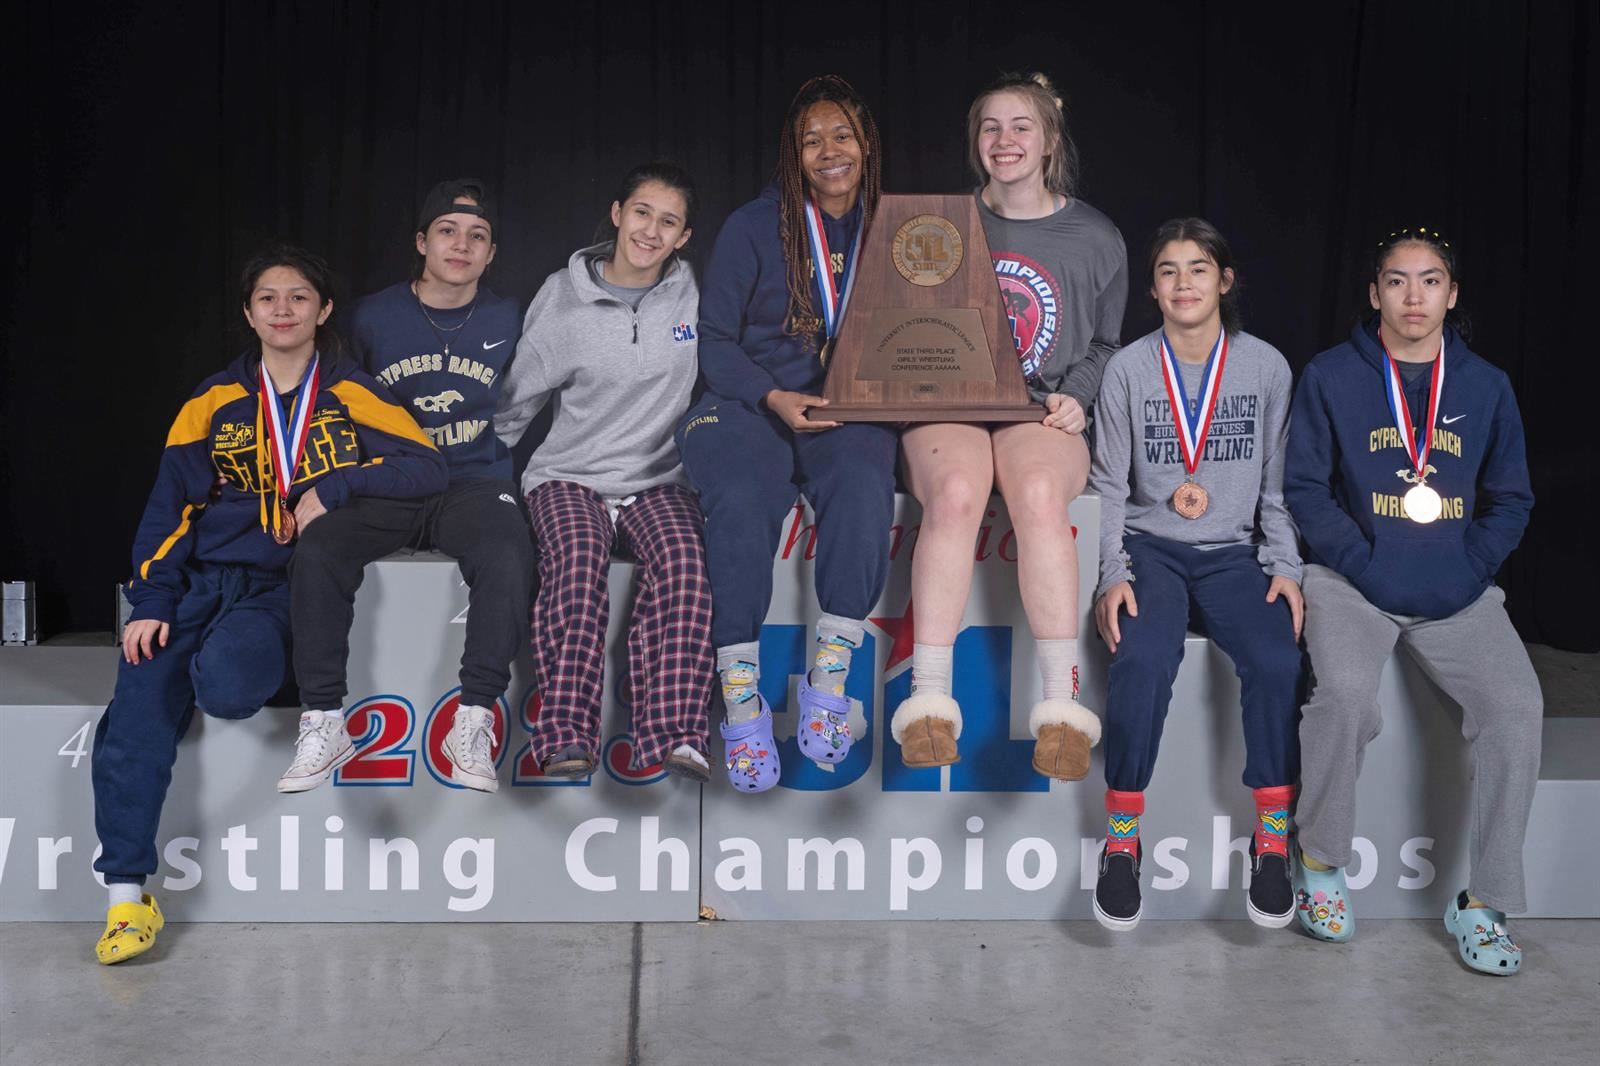 The Cypress Ranch High School girls’ wrestling team placed third in Class 6A at the UIL State Wrestling Championships.